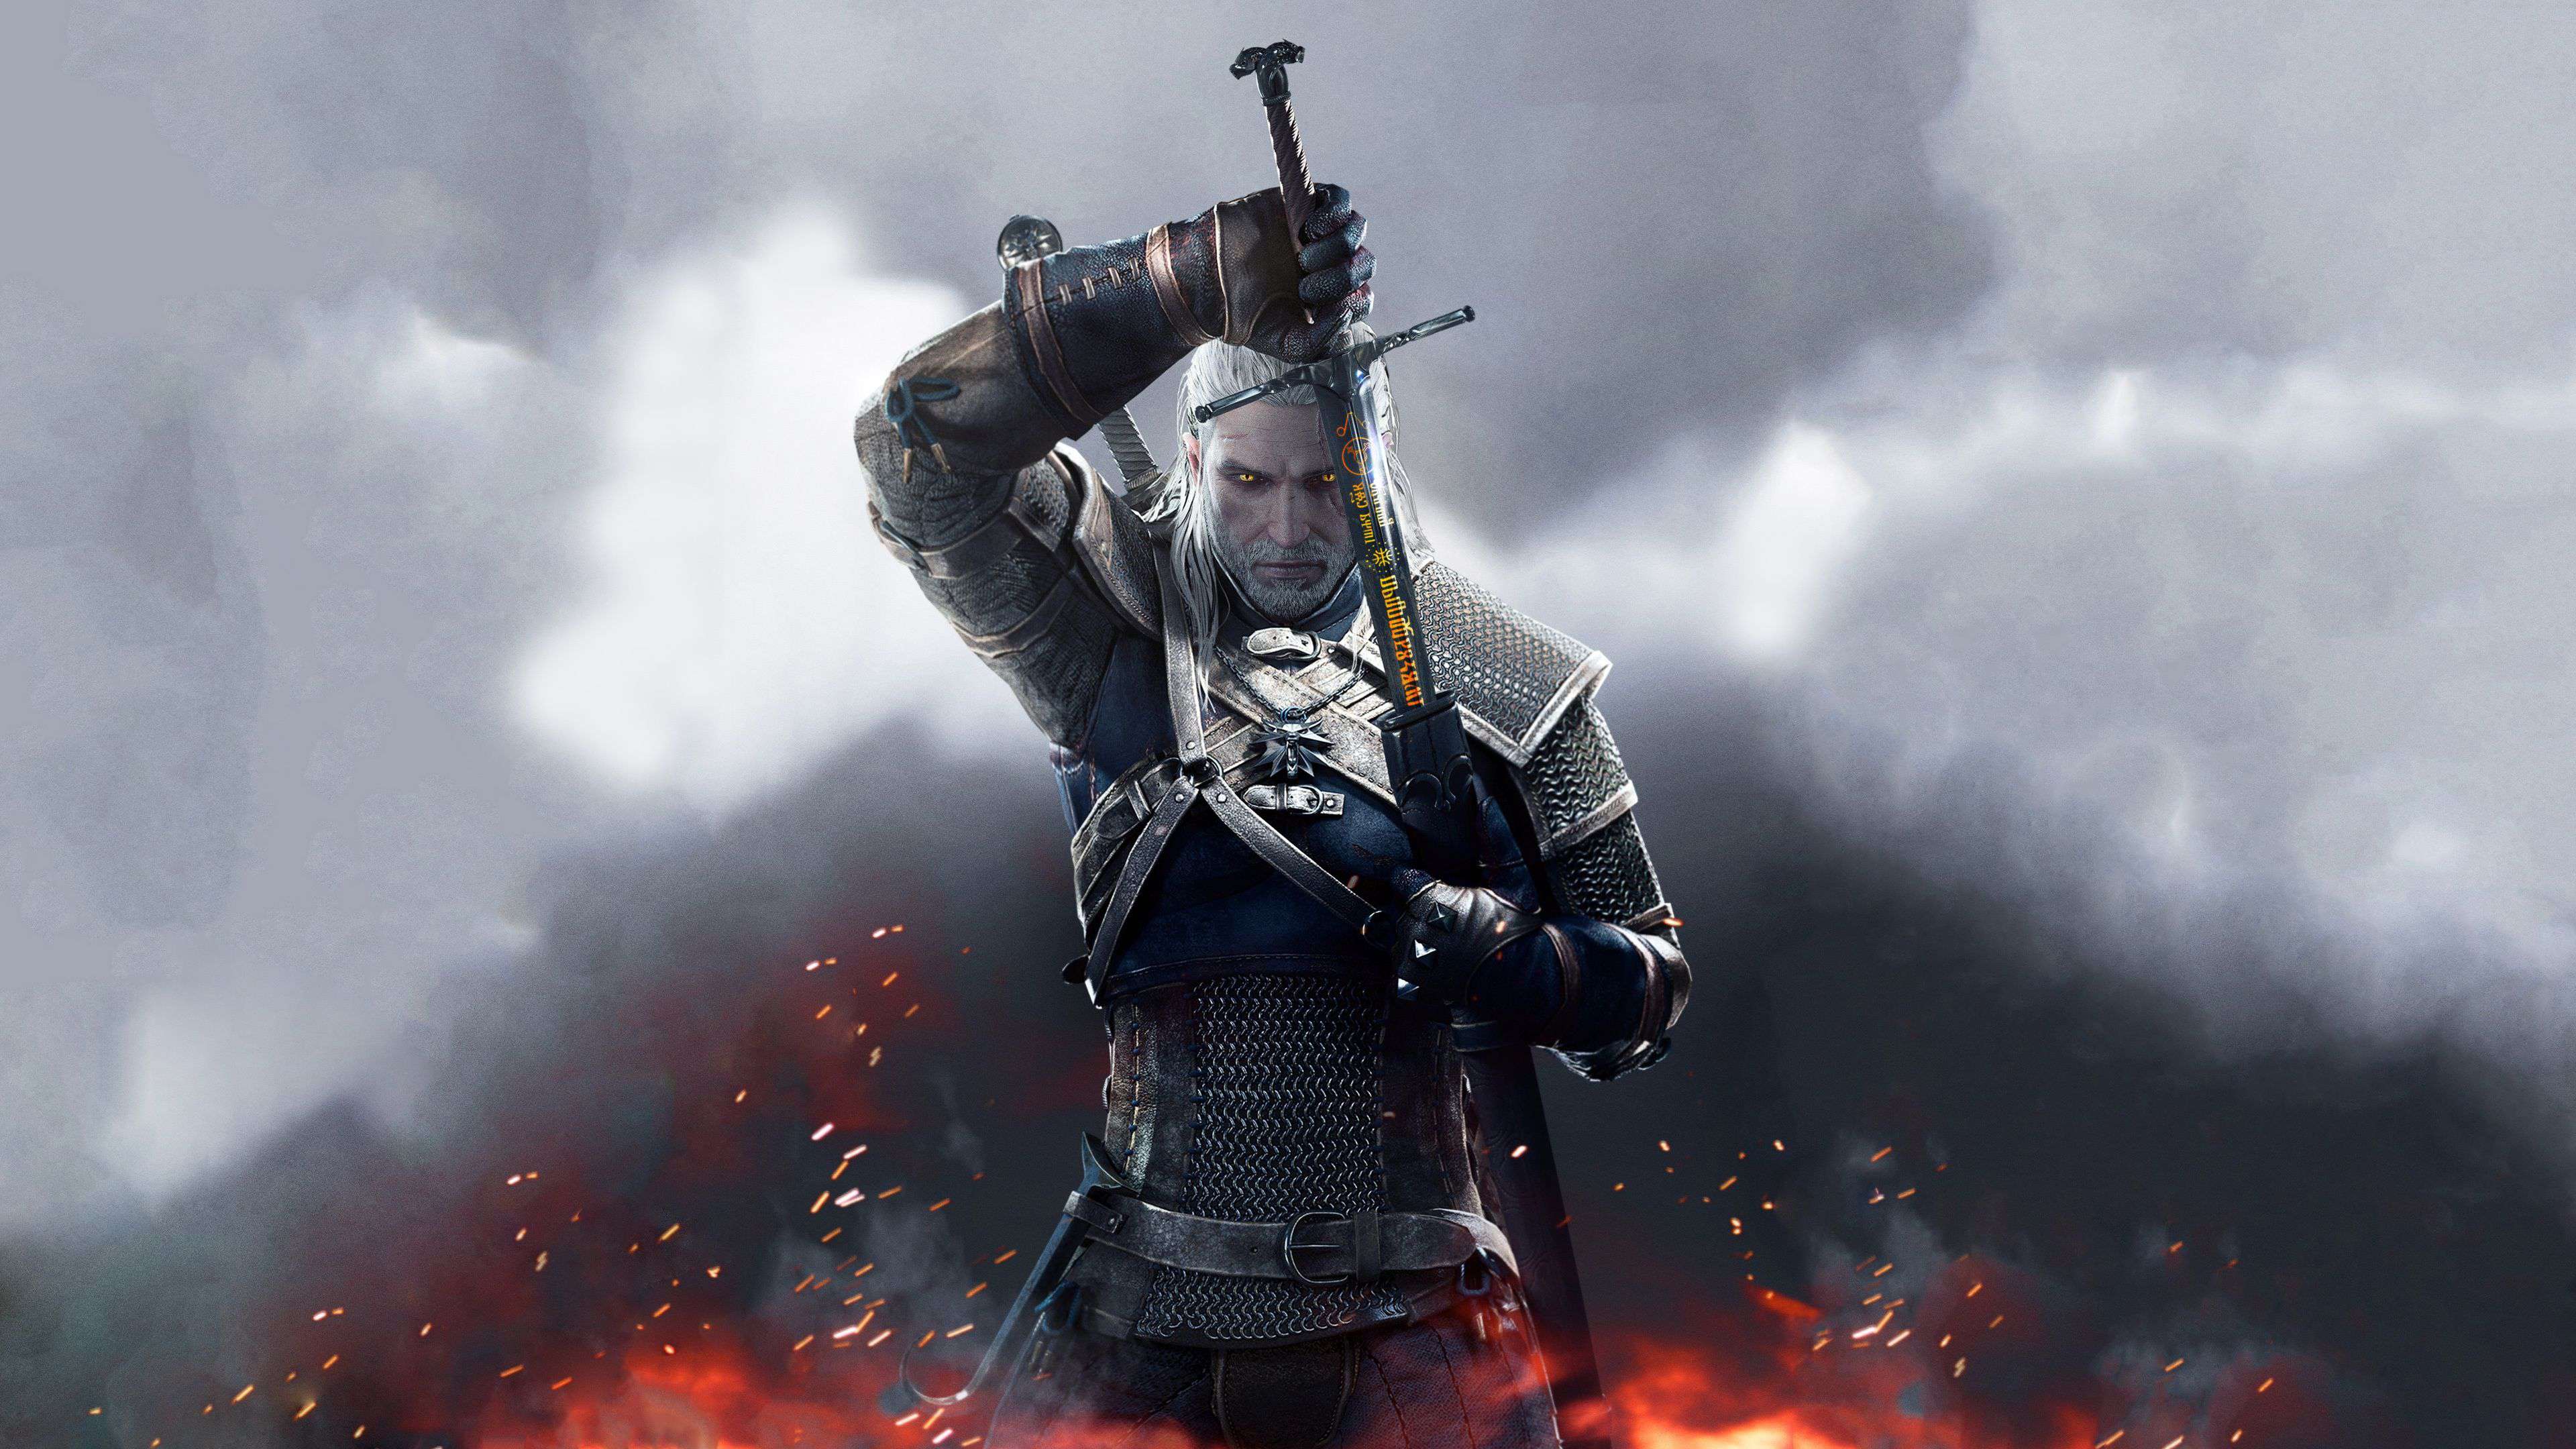 Image for The best swords in The Witcher 3